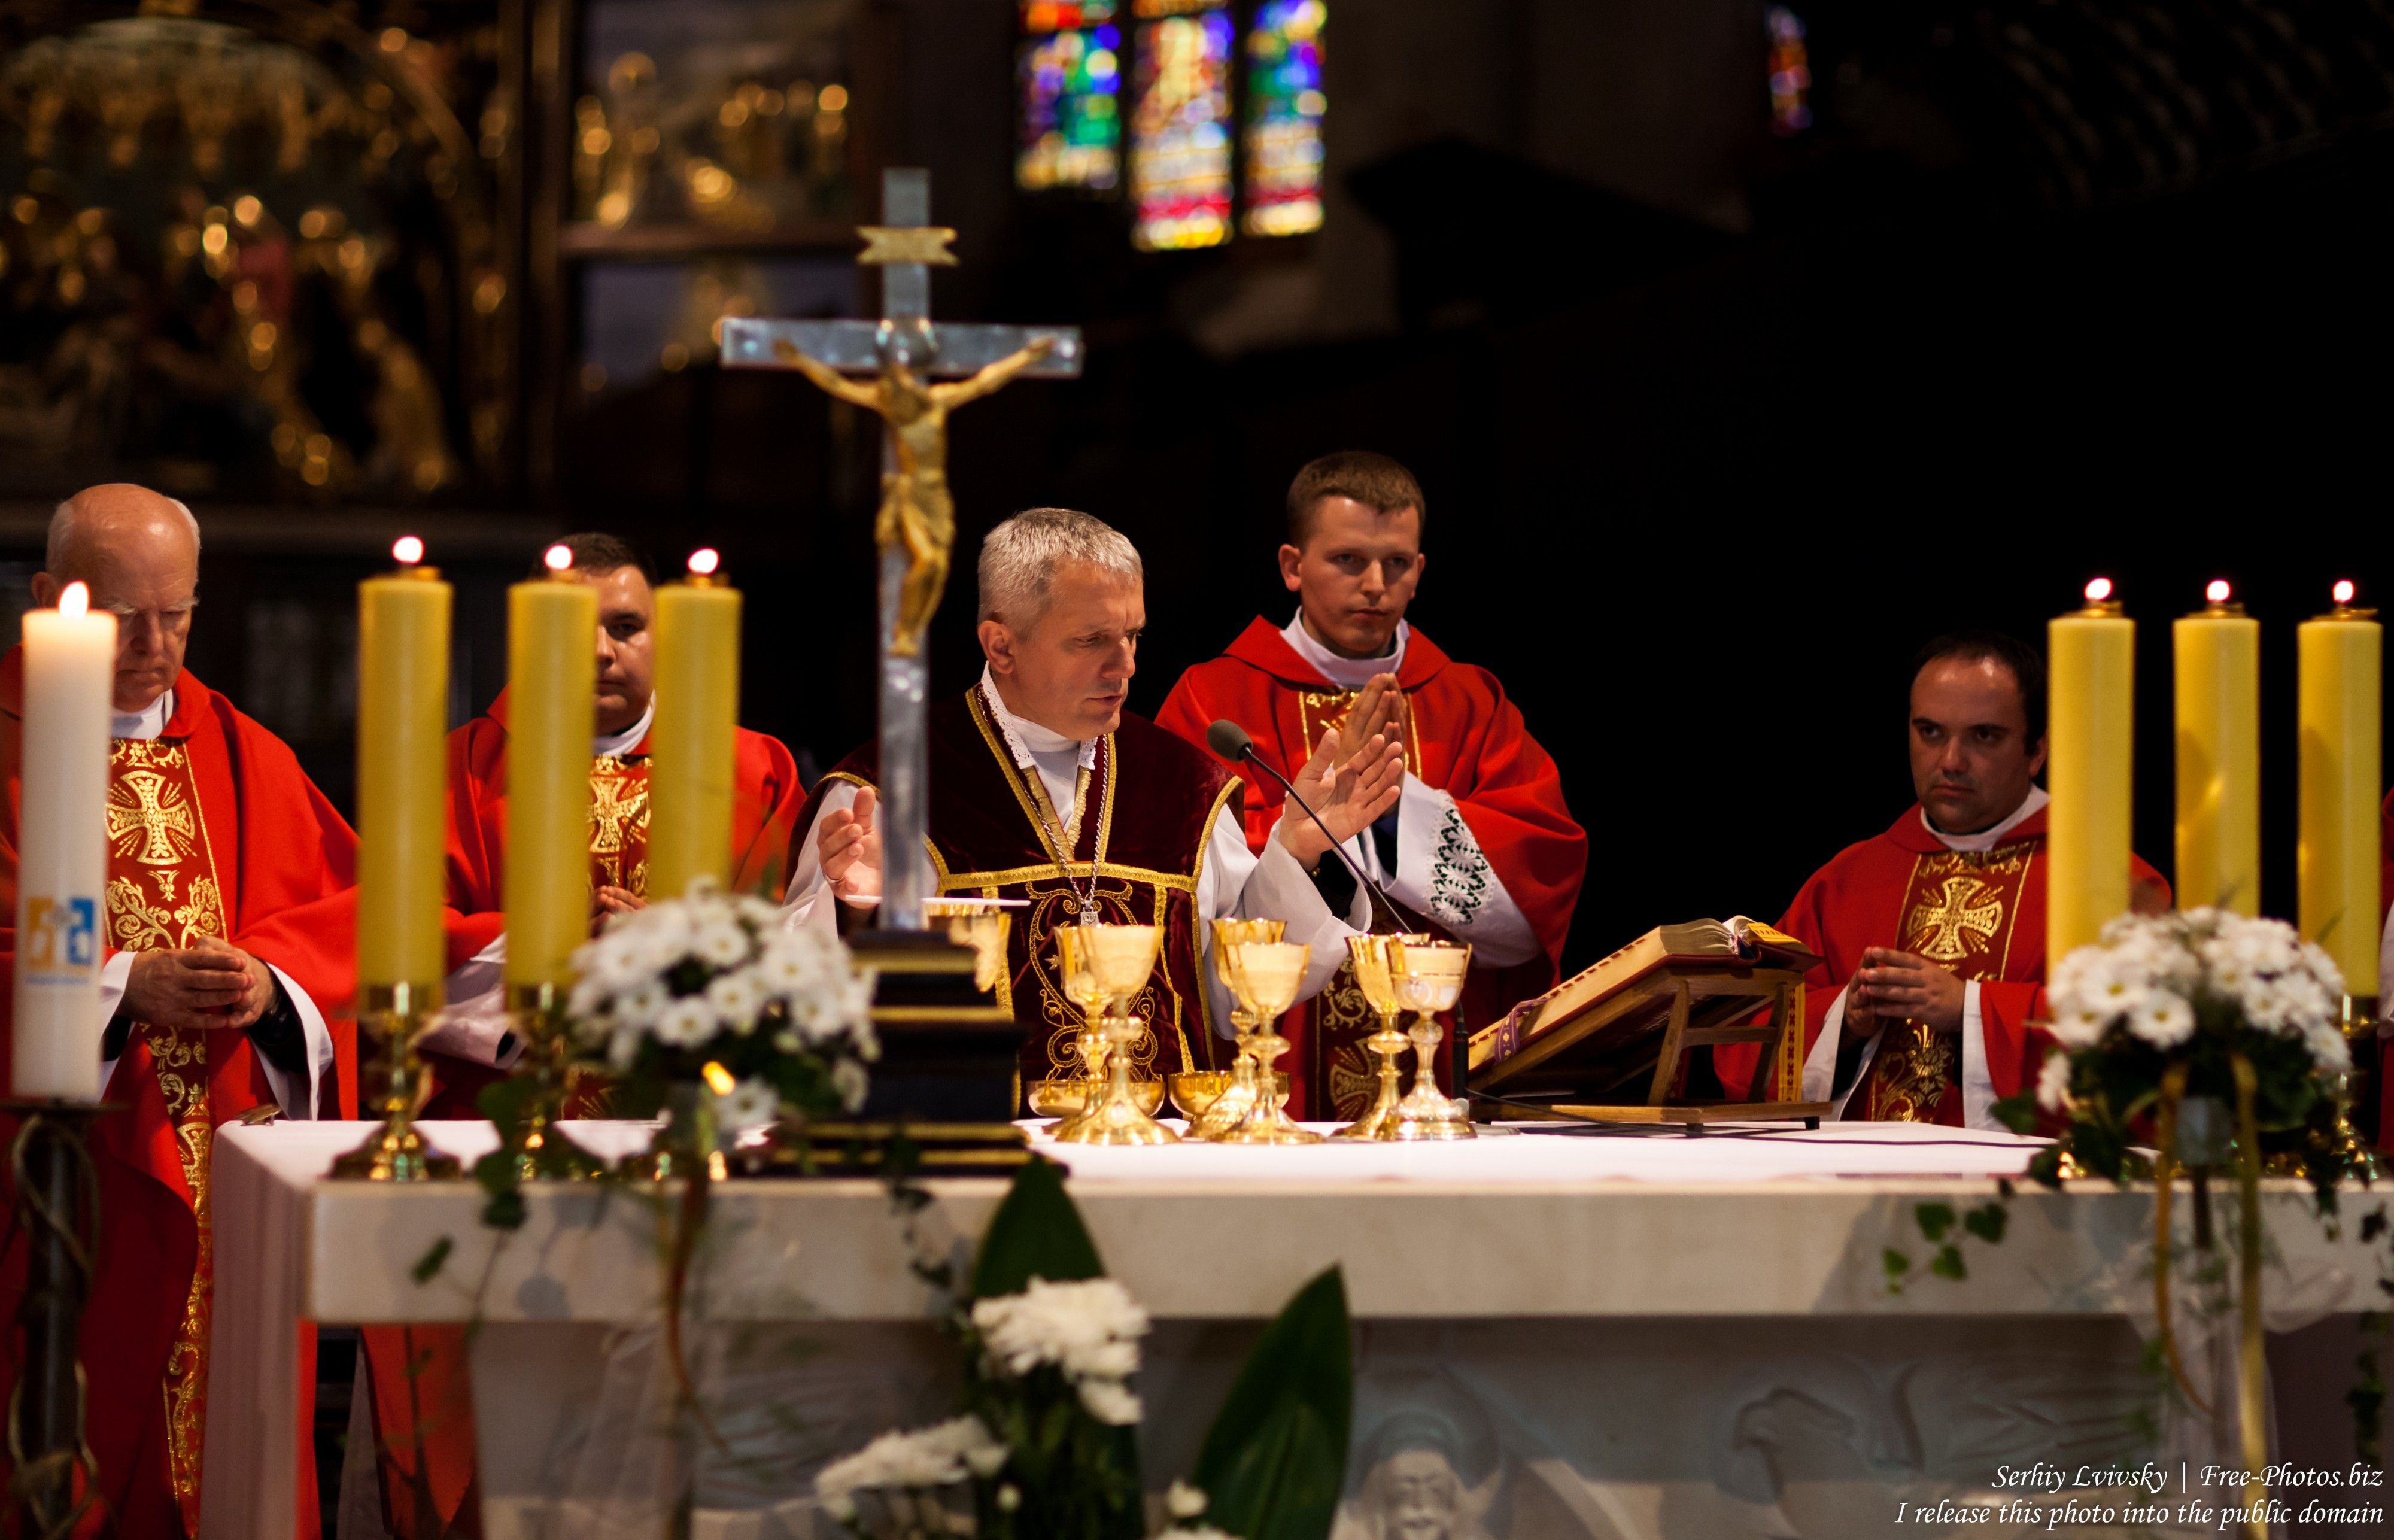 Photo of a Holy Mass in a Catholic church in Przemysl, Poland in July photo 2